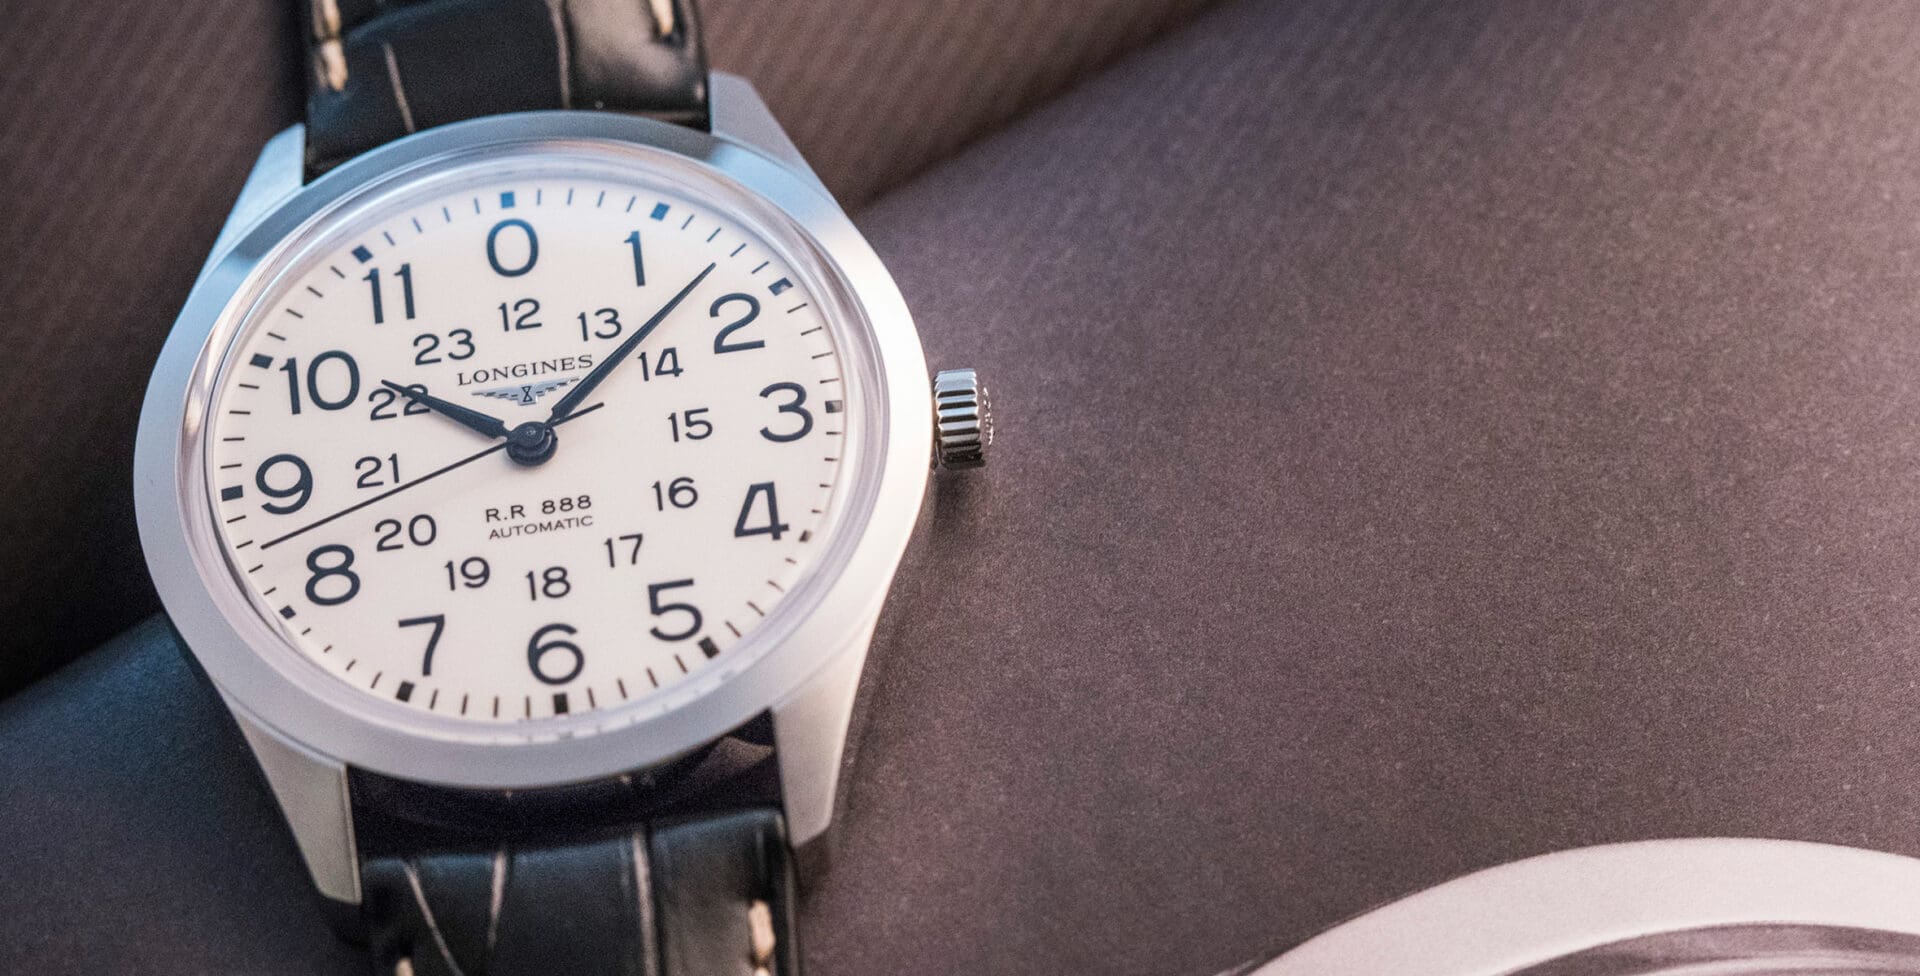 HANDS-ON: All aboard with the Longines Railroad